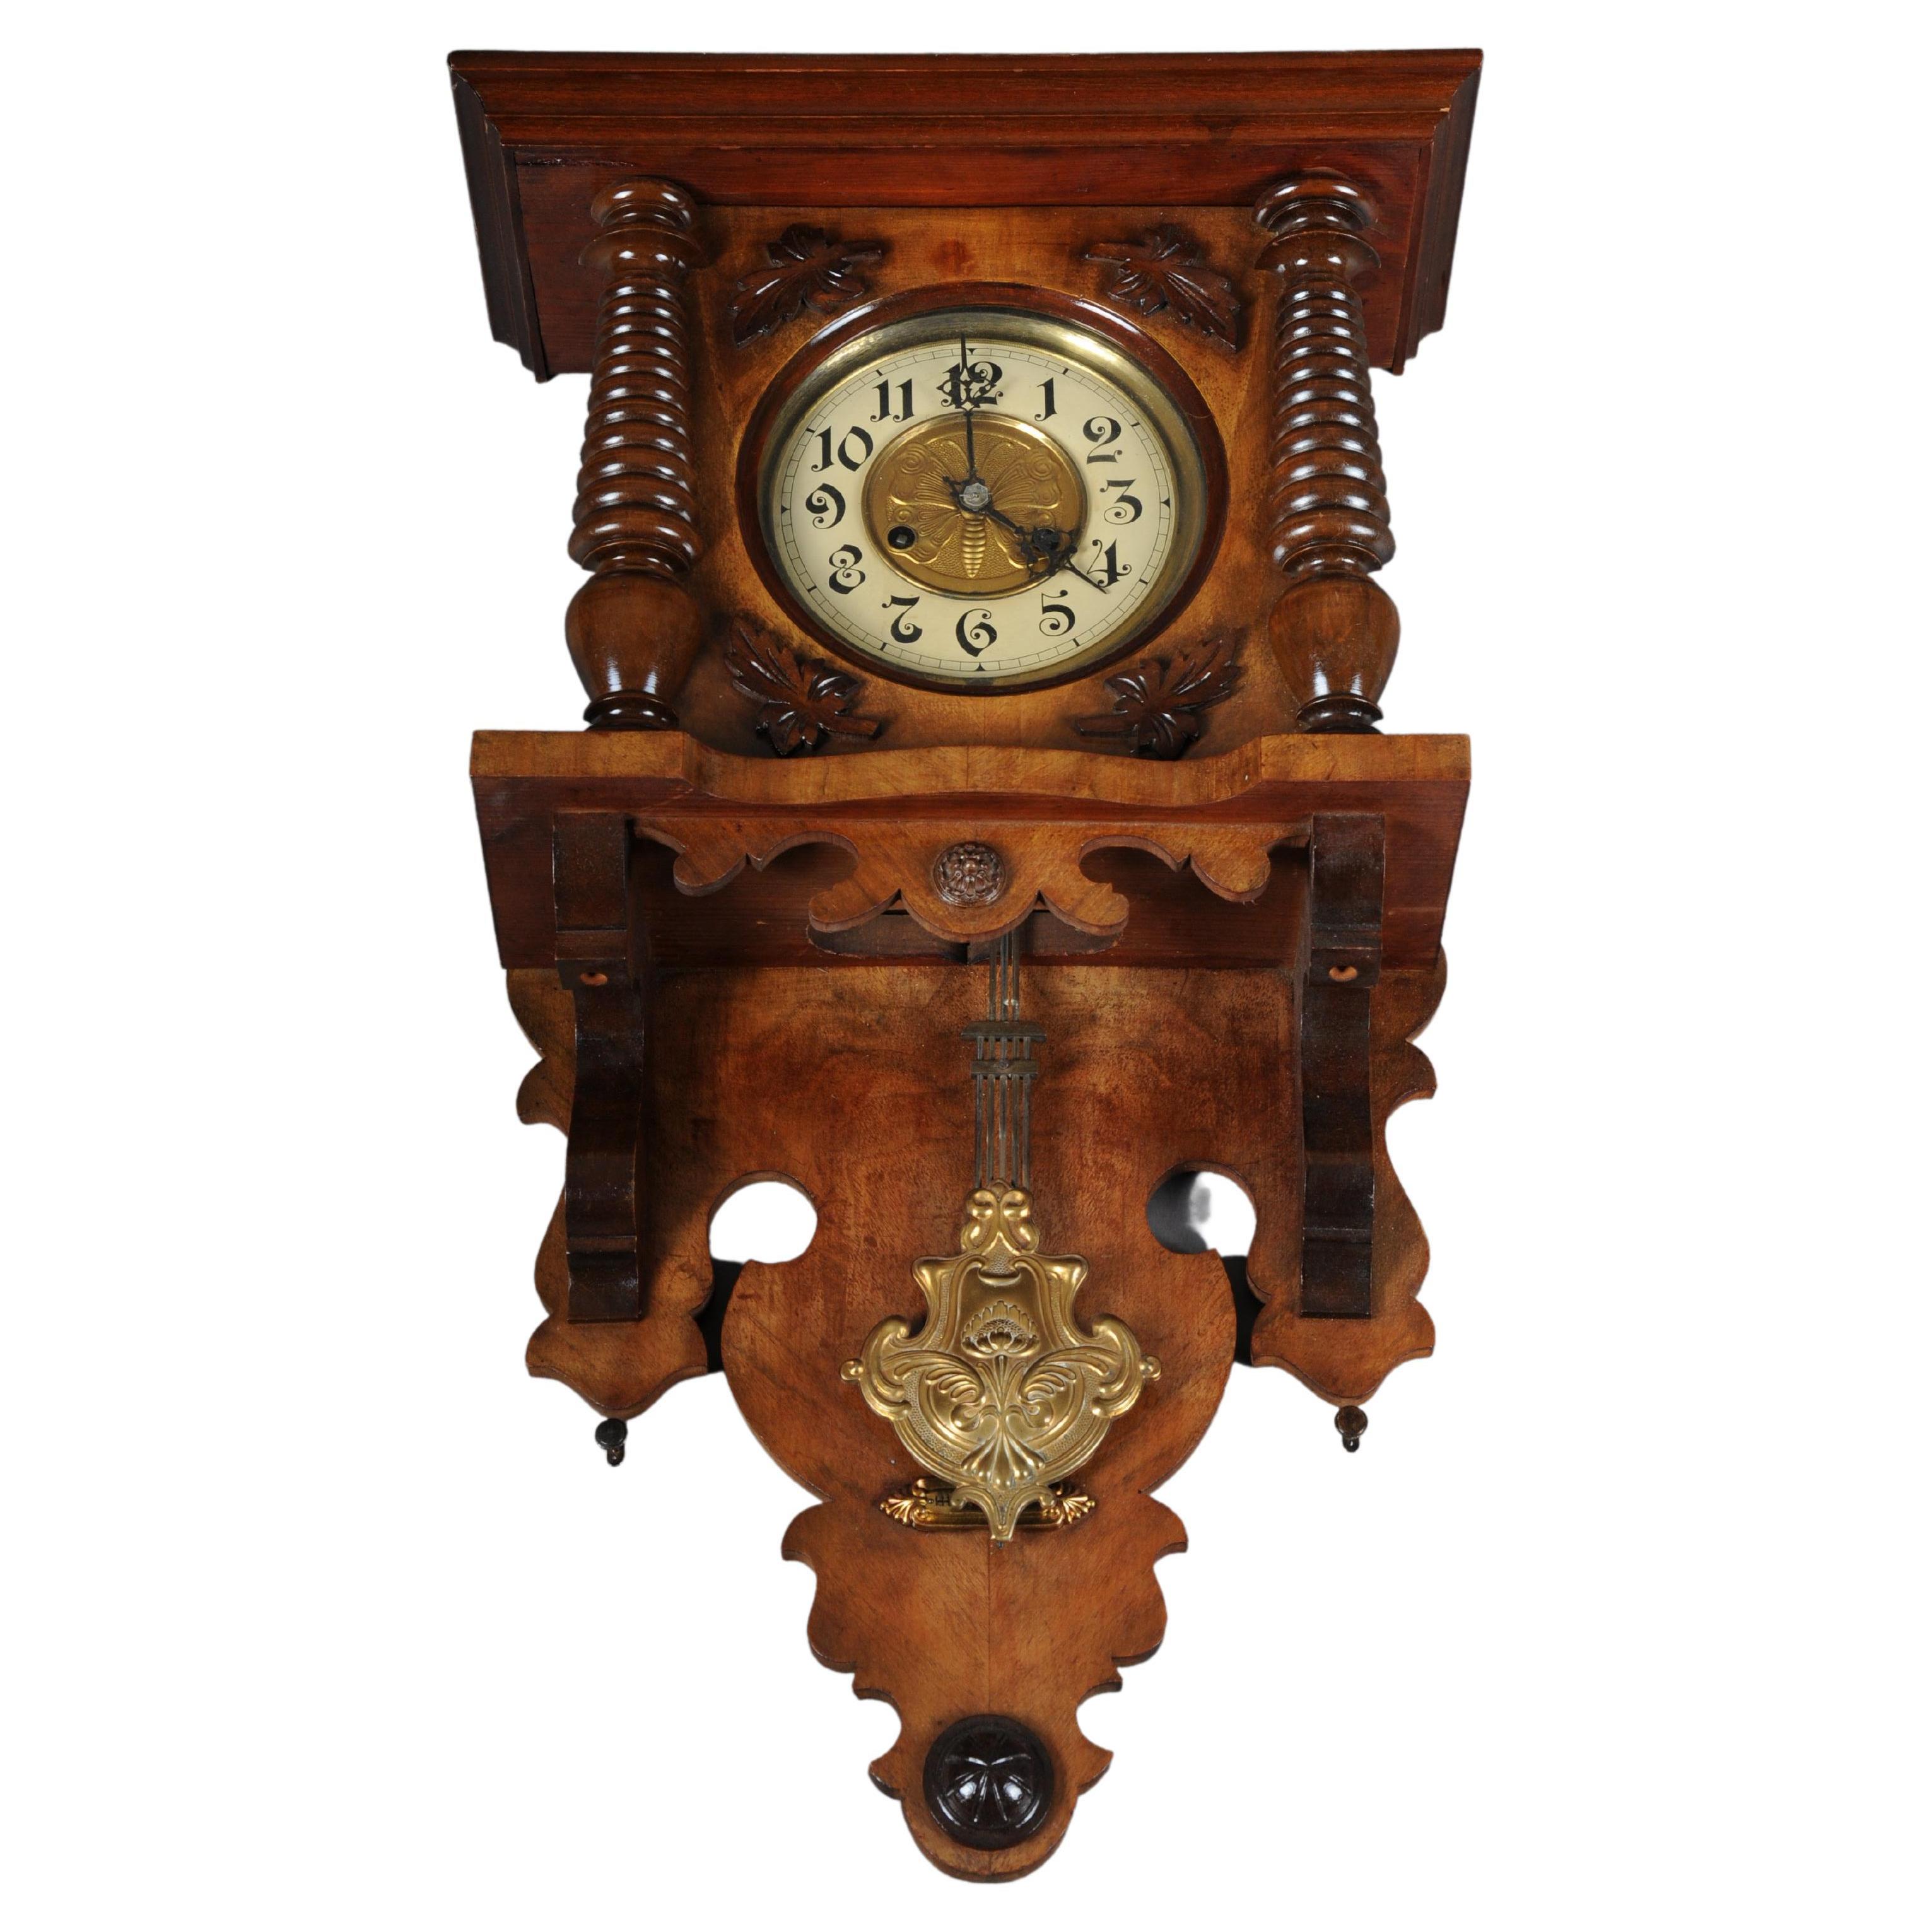 Antique found time wall clock/regulator from around 1880 For Sale